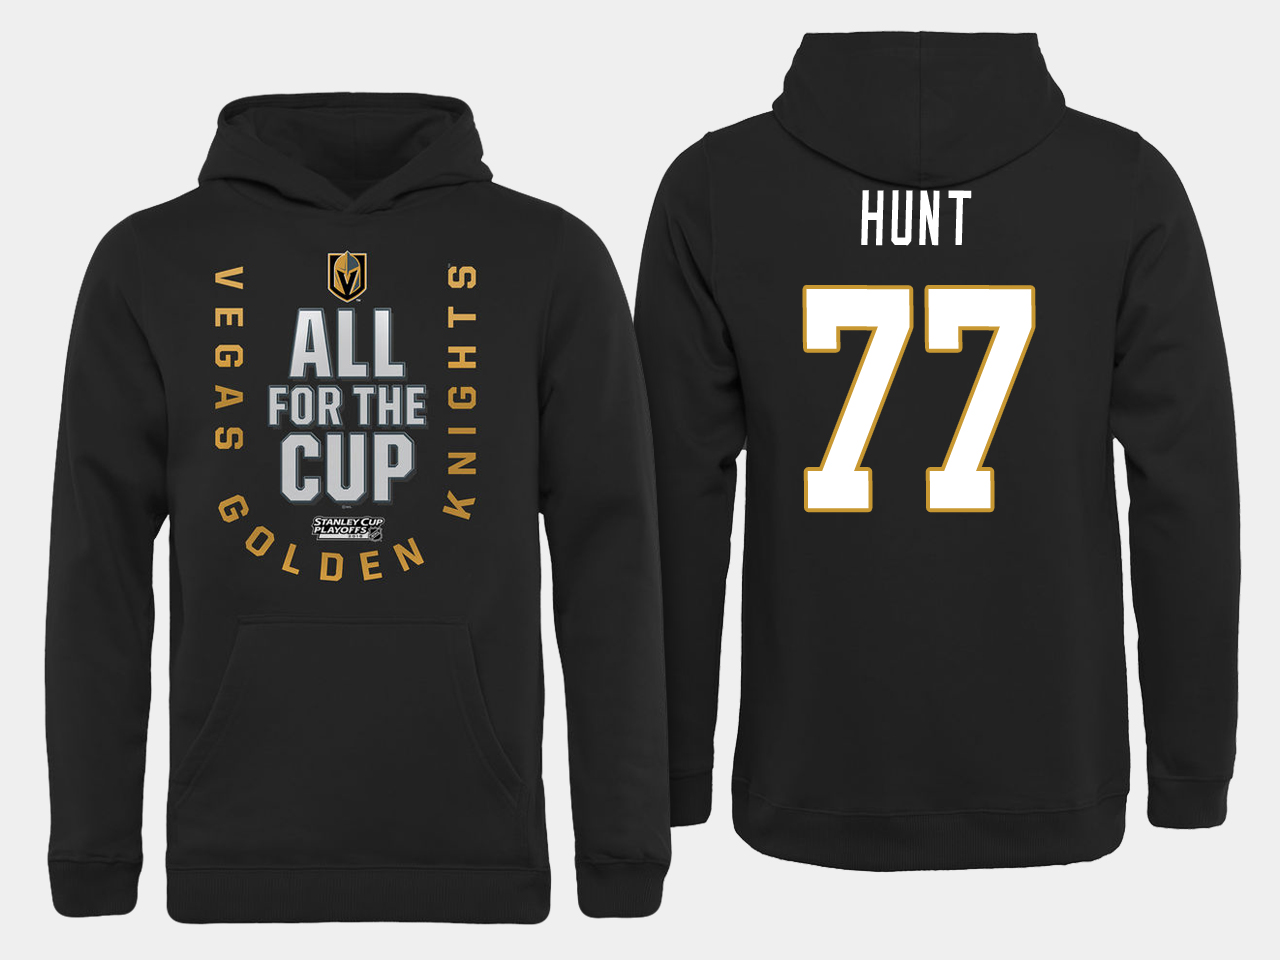 Men NHL Vegas Golden Knights #77 Hunt All for the Cup hoodie->more nhl jerseys->NHL Jersey